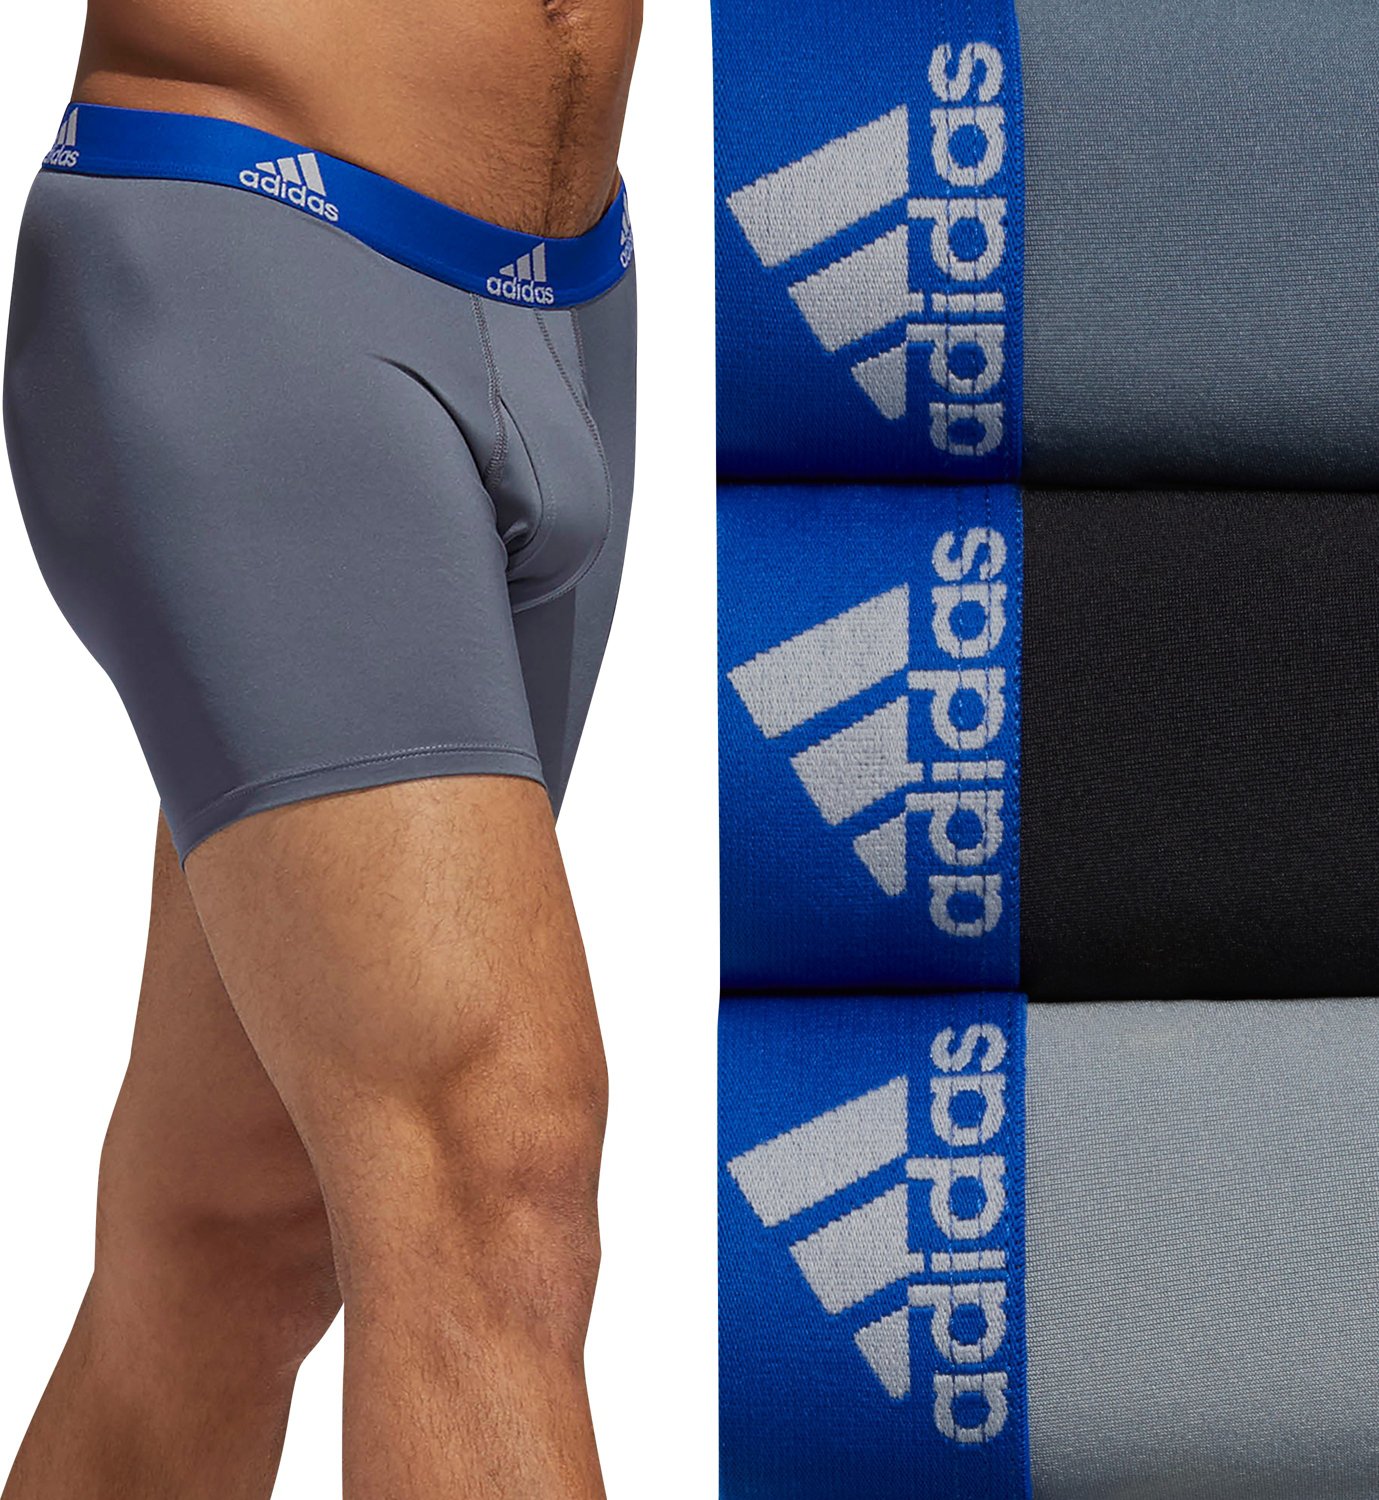 Columbia  Exclusive 6 Pack Performance Boxer Brief